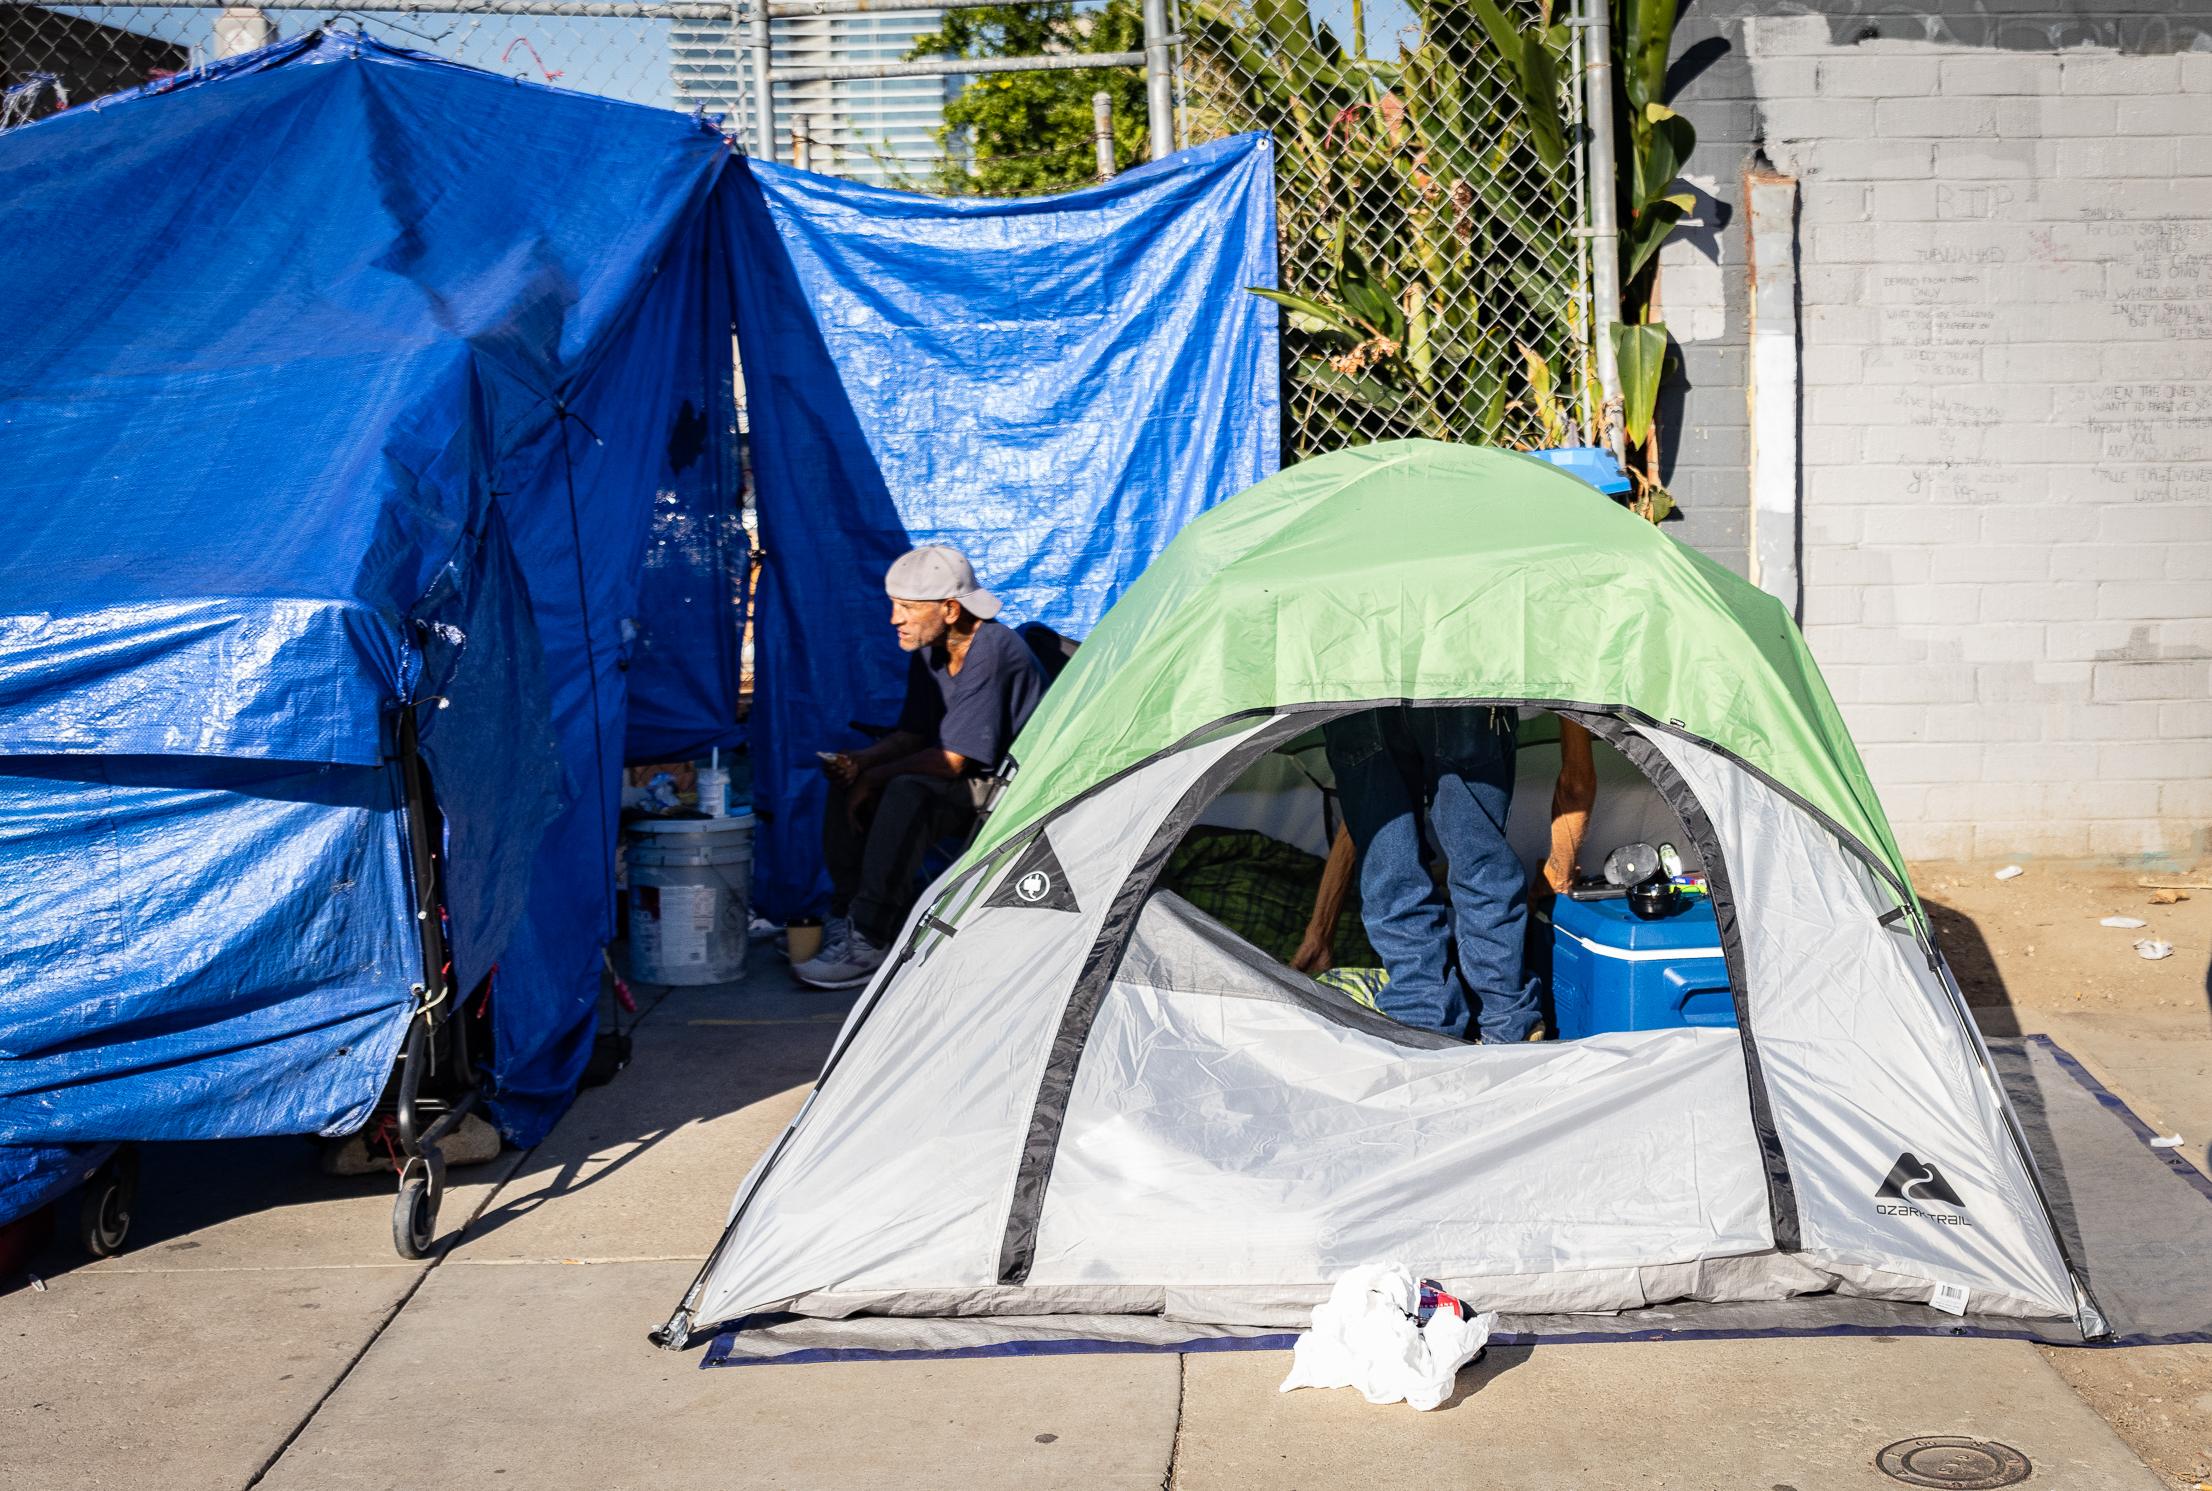 Supreme Court to Decide Whether Cities Can Cite Homeless People for Camping on Street